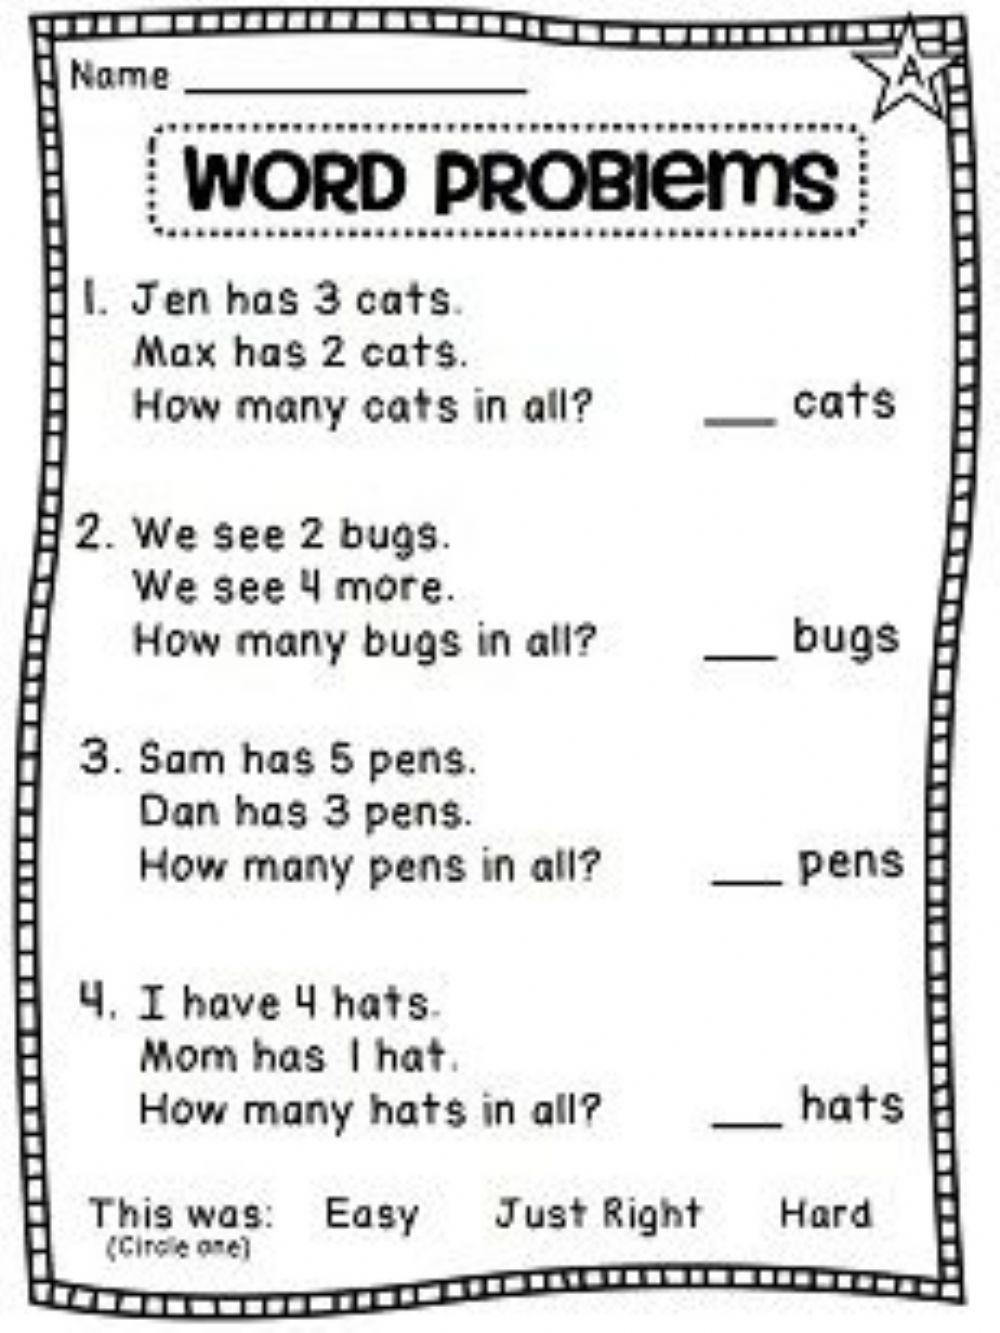 Word problems